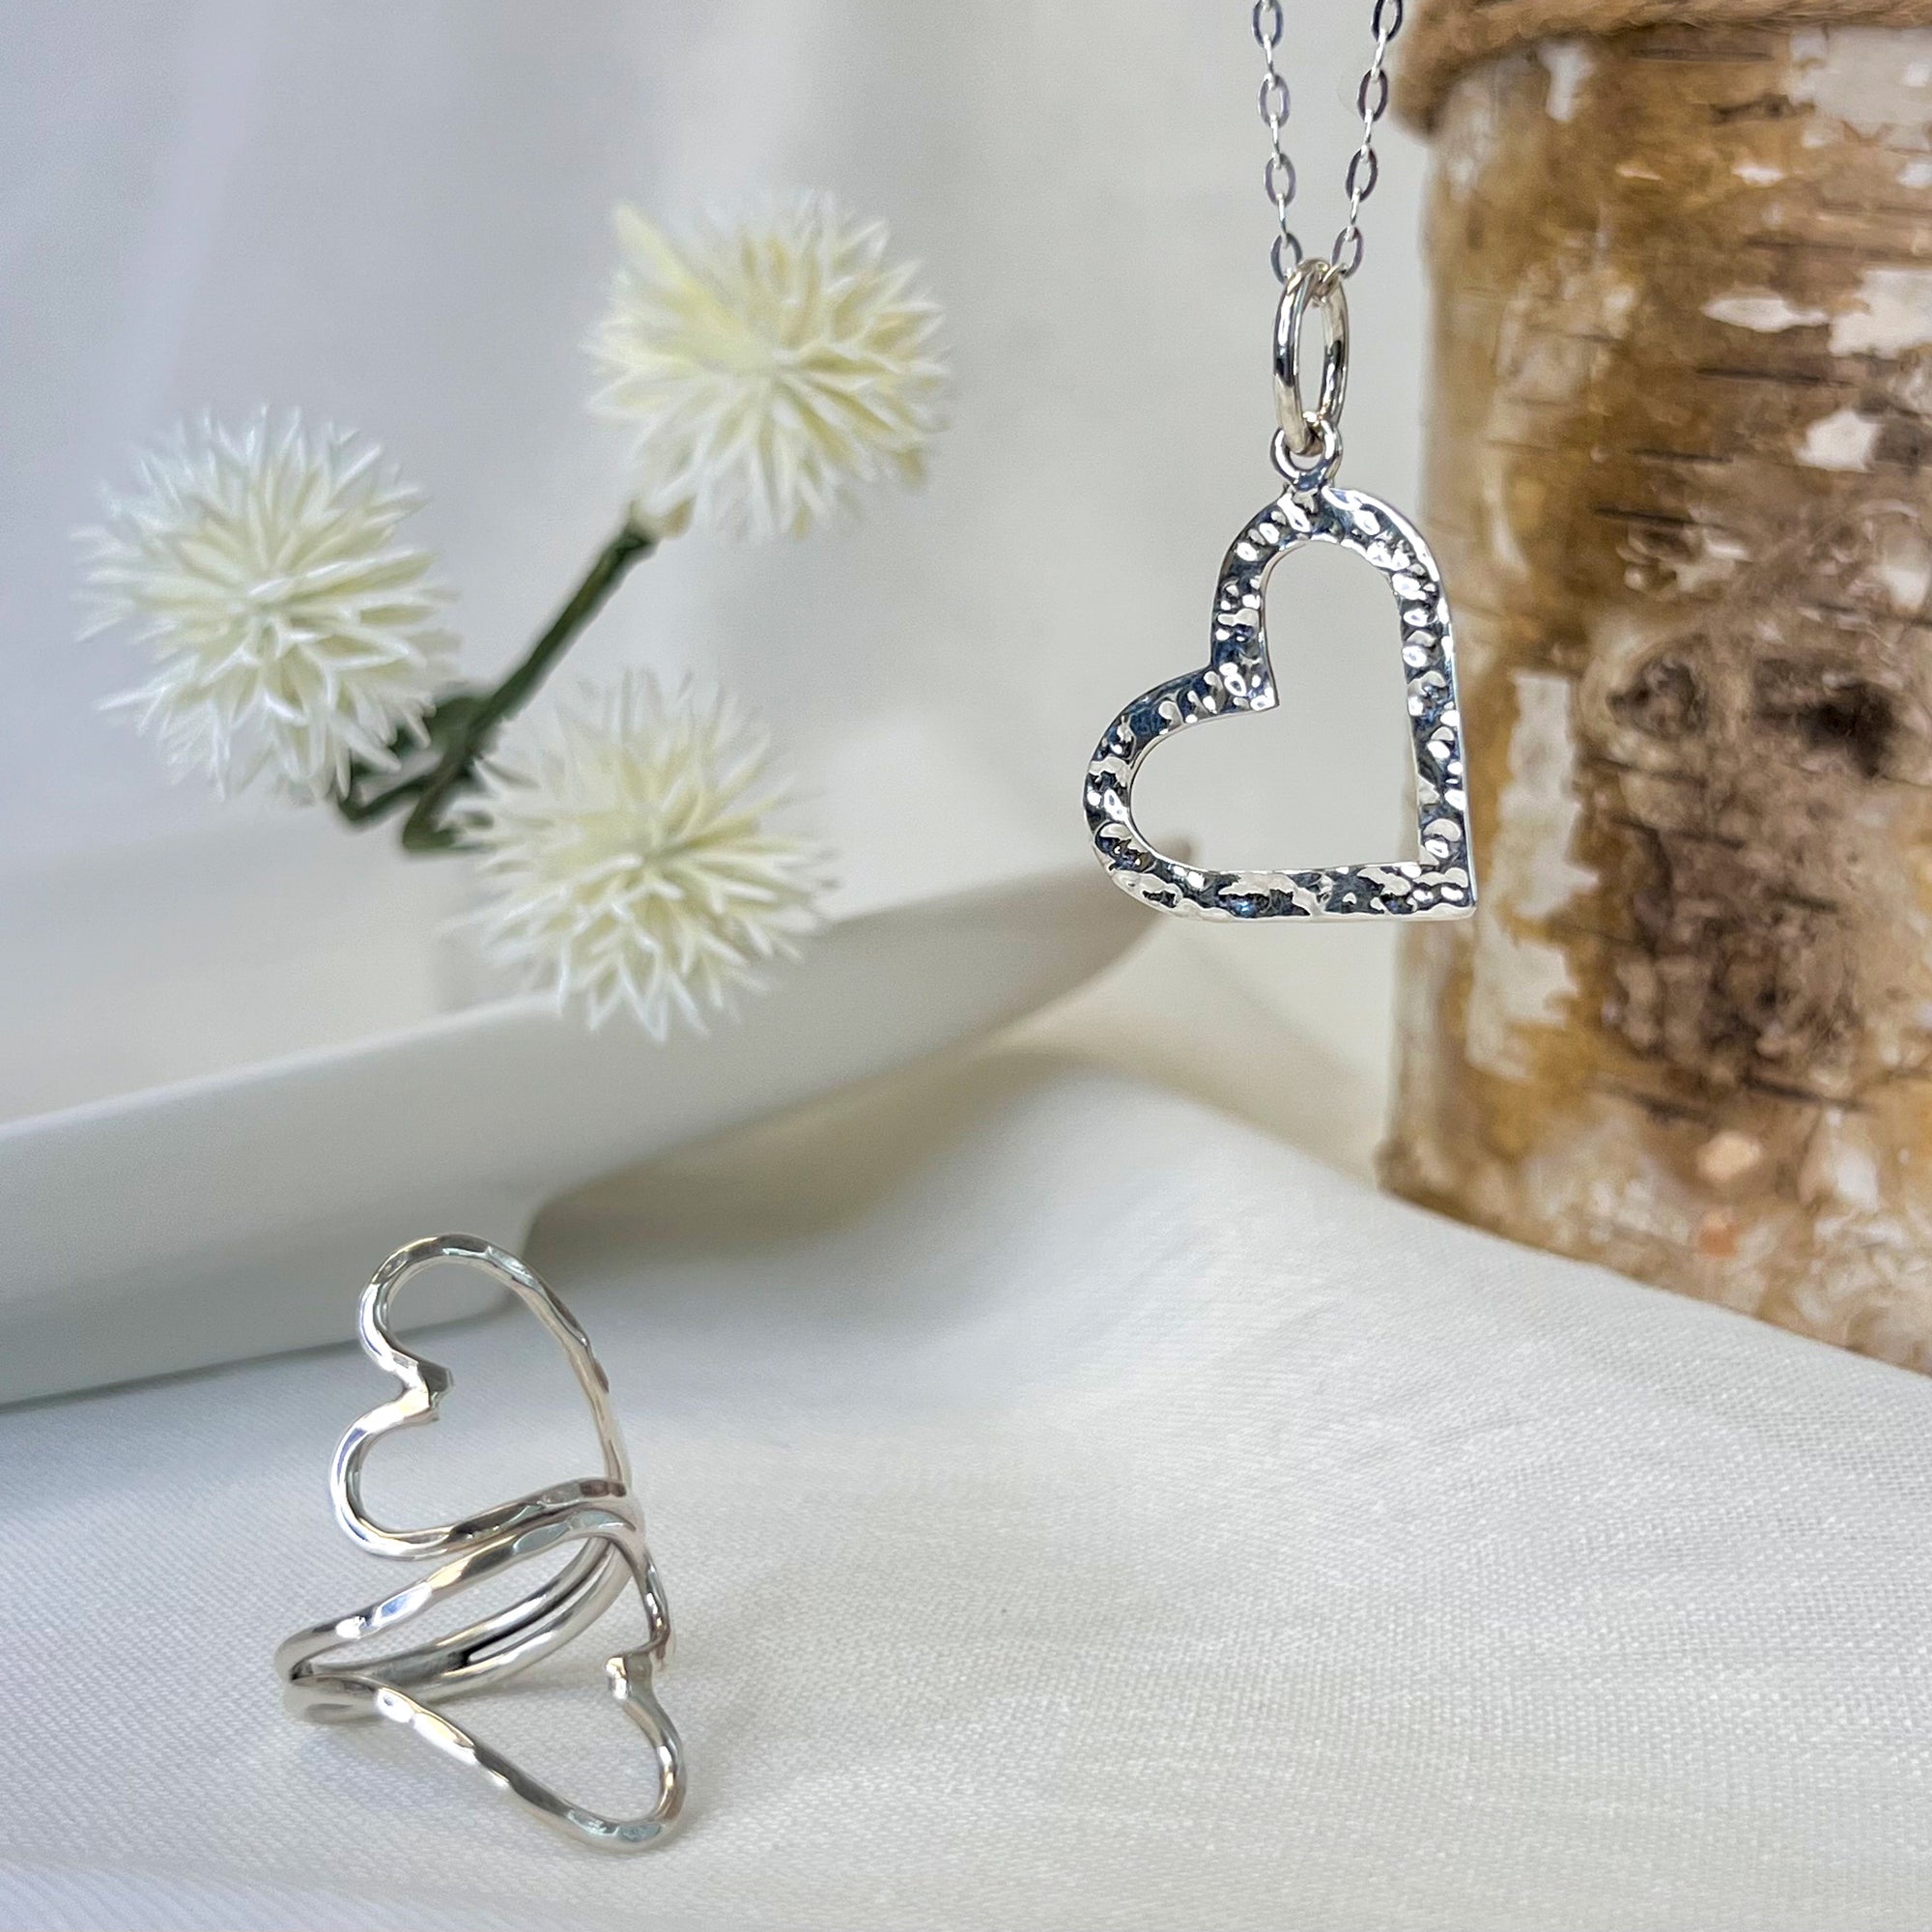 Sterling Silver Hammered Heart Charm Pendant | Charles Albert Jewelry